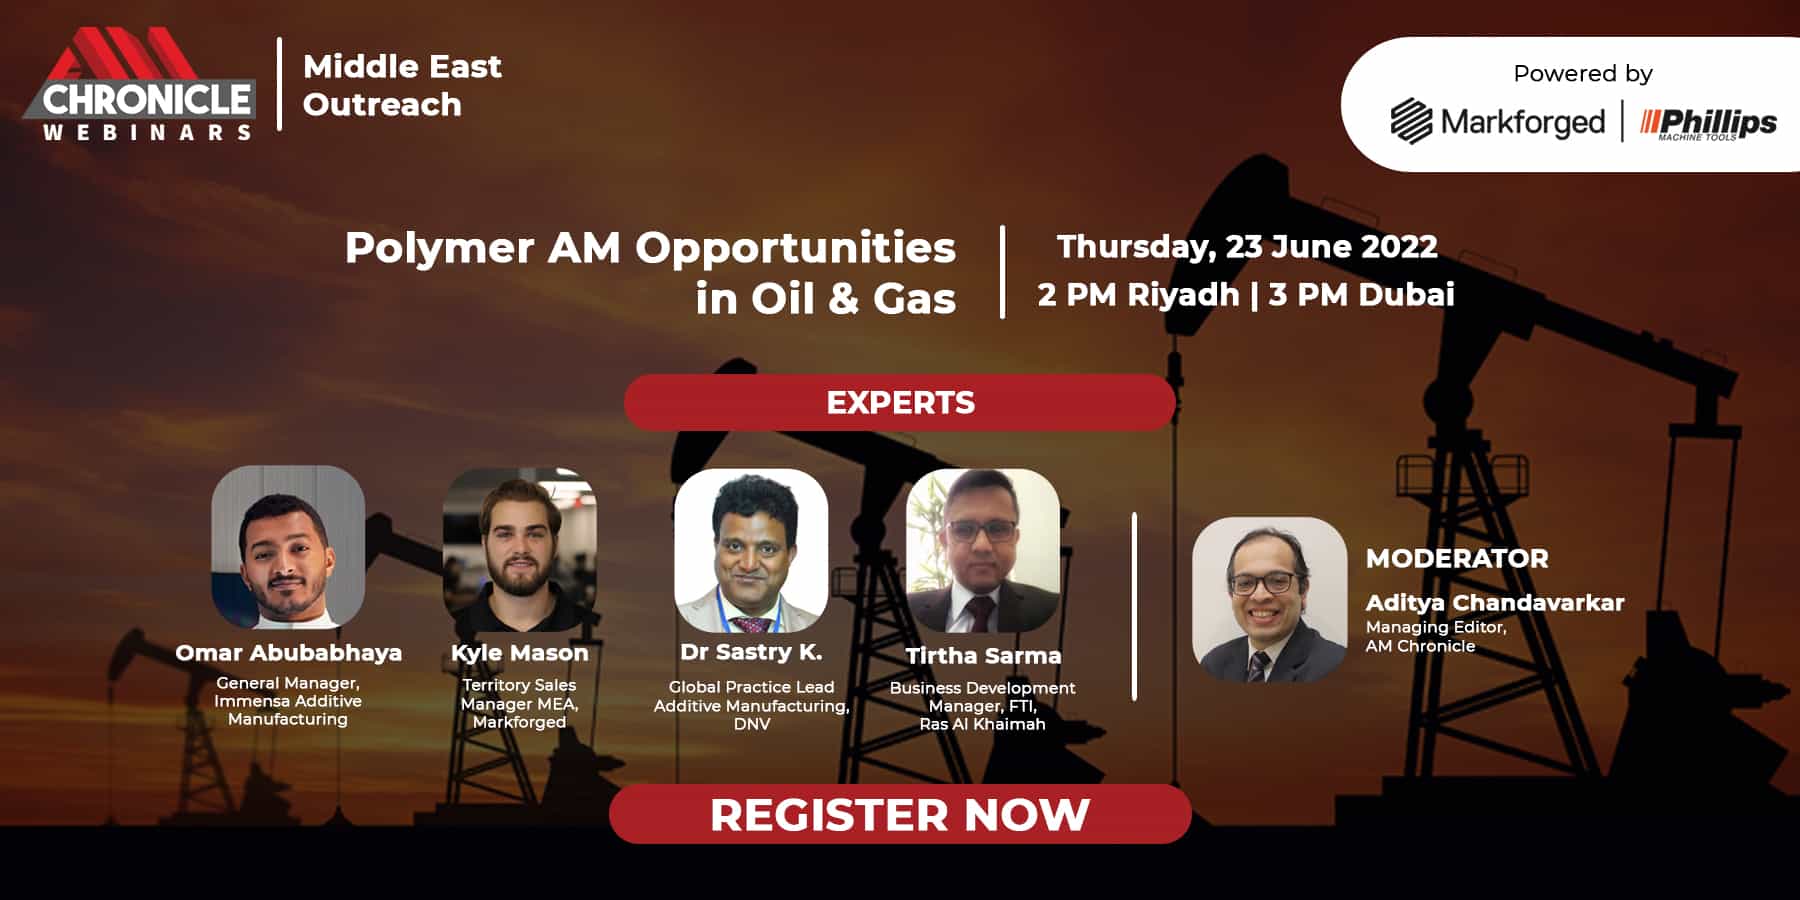 AM Chronicle Middle East Outreach: Polymer AM Opportunities in Oil & Gas